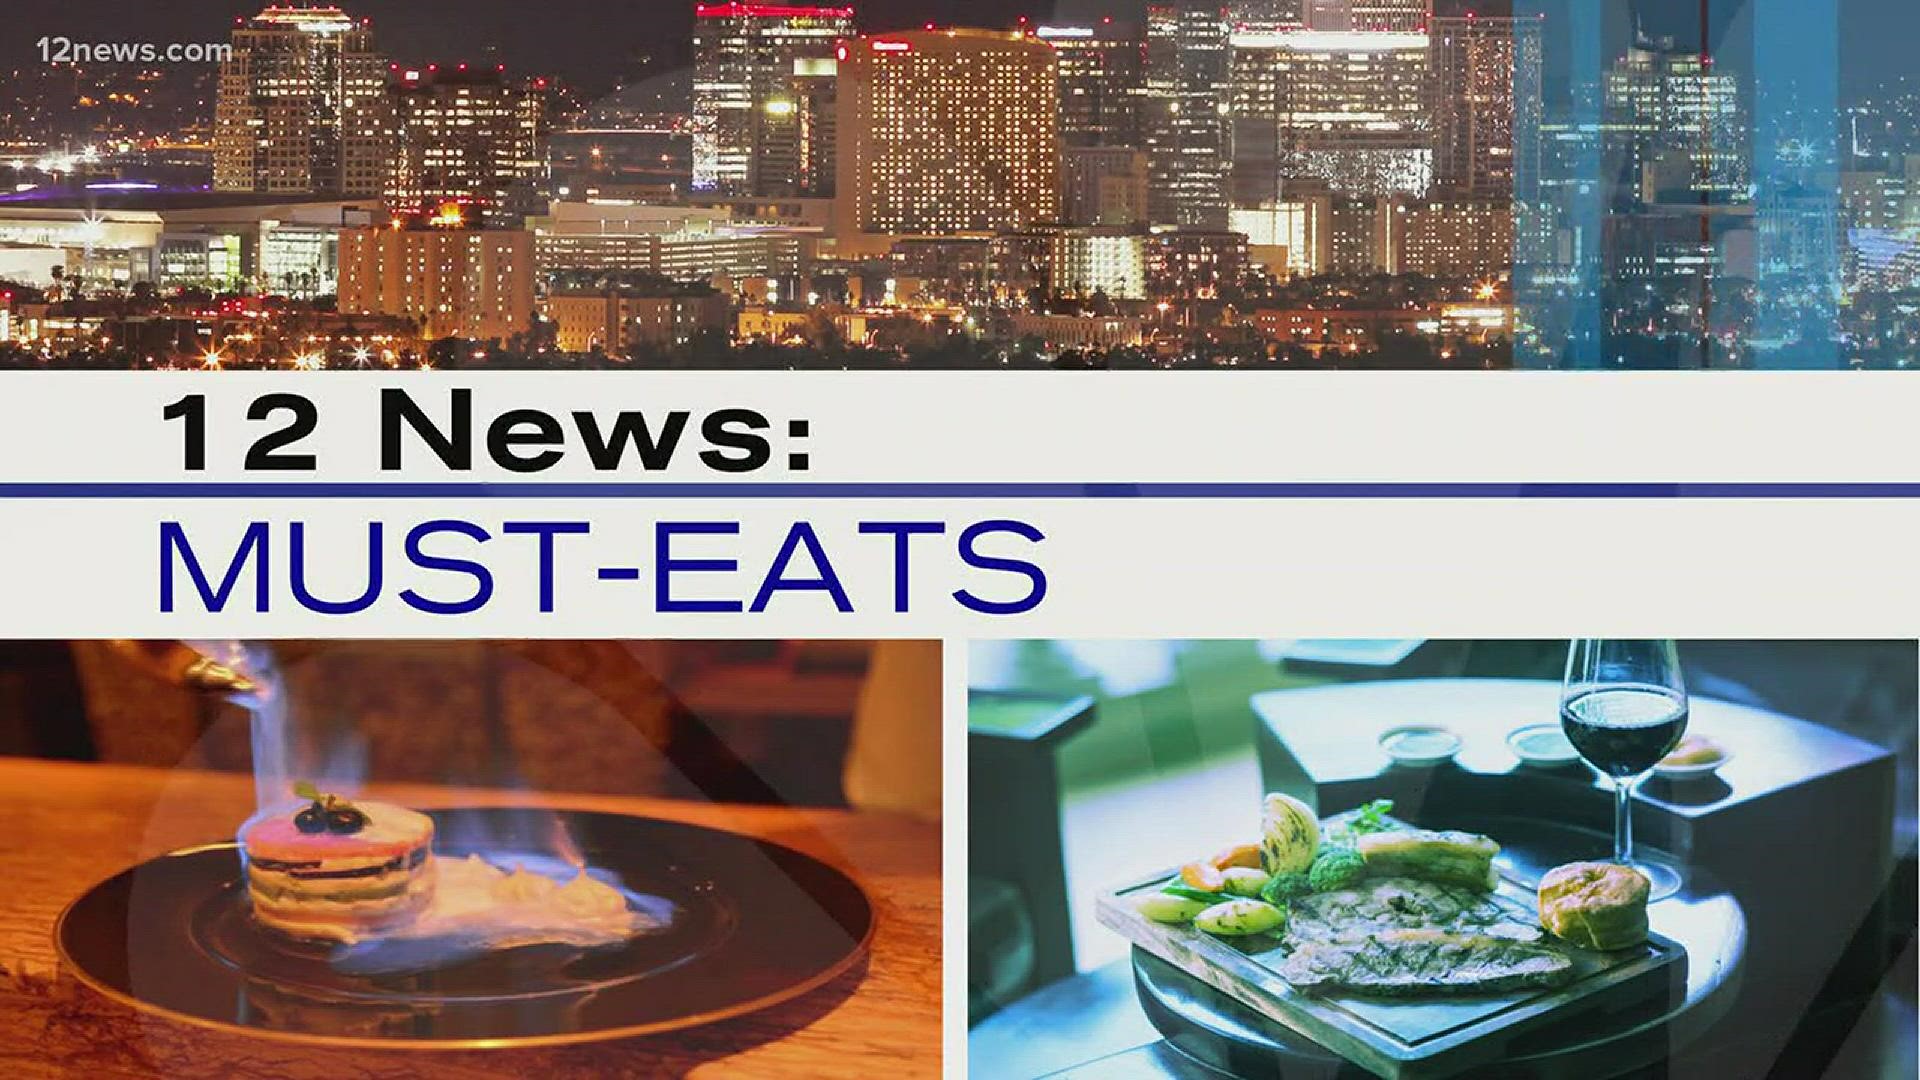 12 News' Brandon Hamilton heads to a must-eat restaurant in Scottsdale that perfectly captures the ol' wild west with delicious food and drinks.